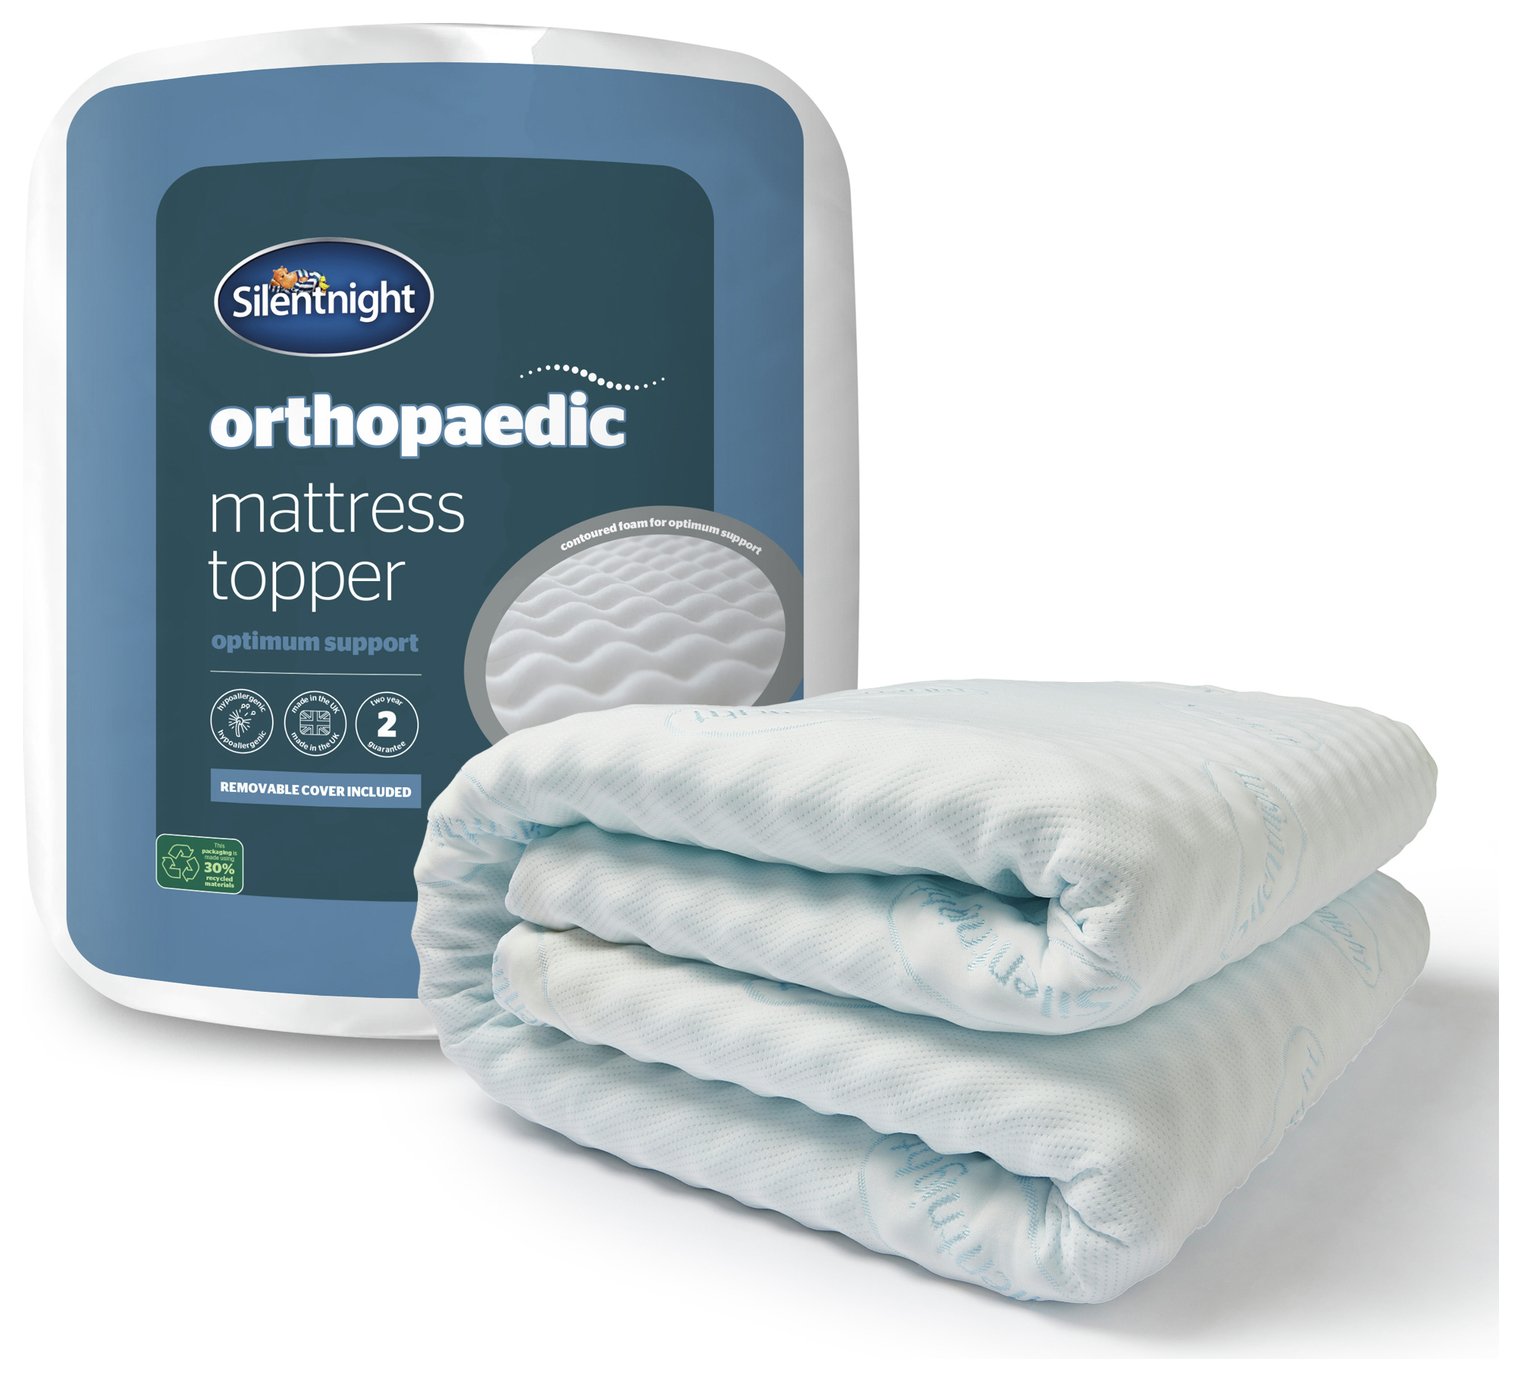 Silentnight Orthopaedic Mattress Topper with Cover - Single